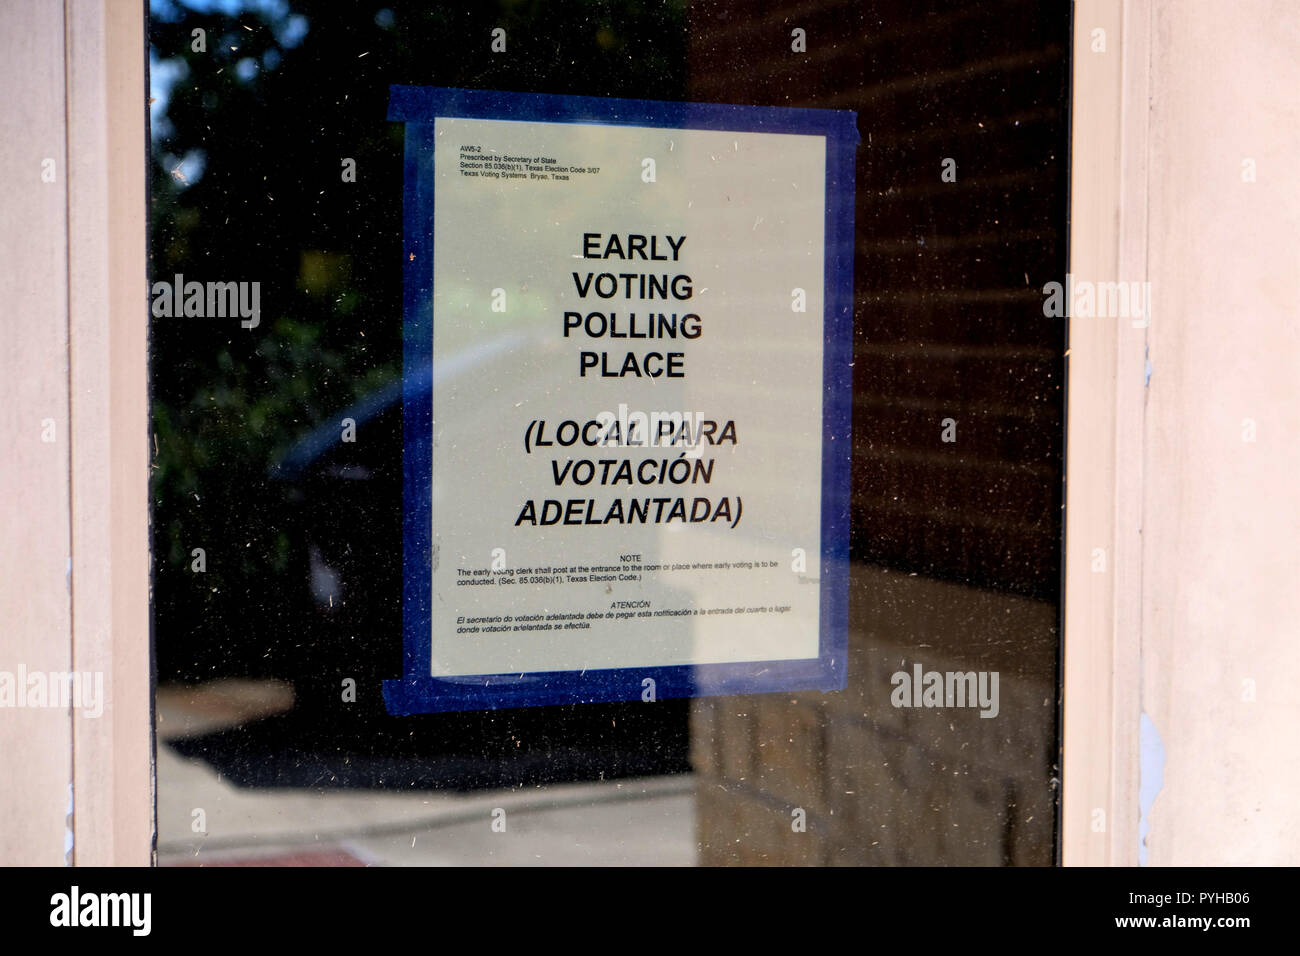 Bilingual English-Spanish sign on a glass for an Early Voting Polling Place; 2018 midterm elections, College Station, Texas, USA. Stock Photo